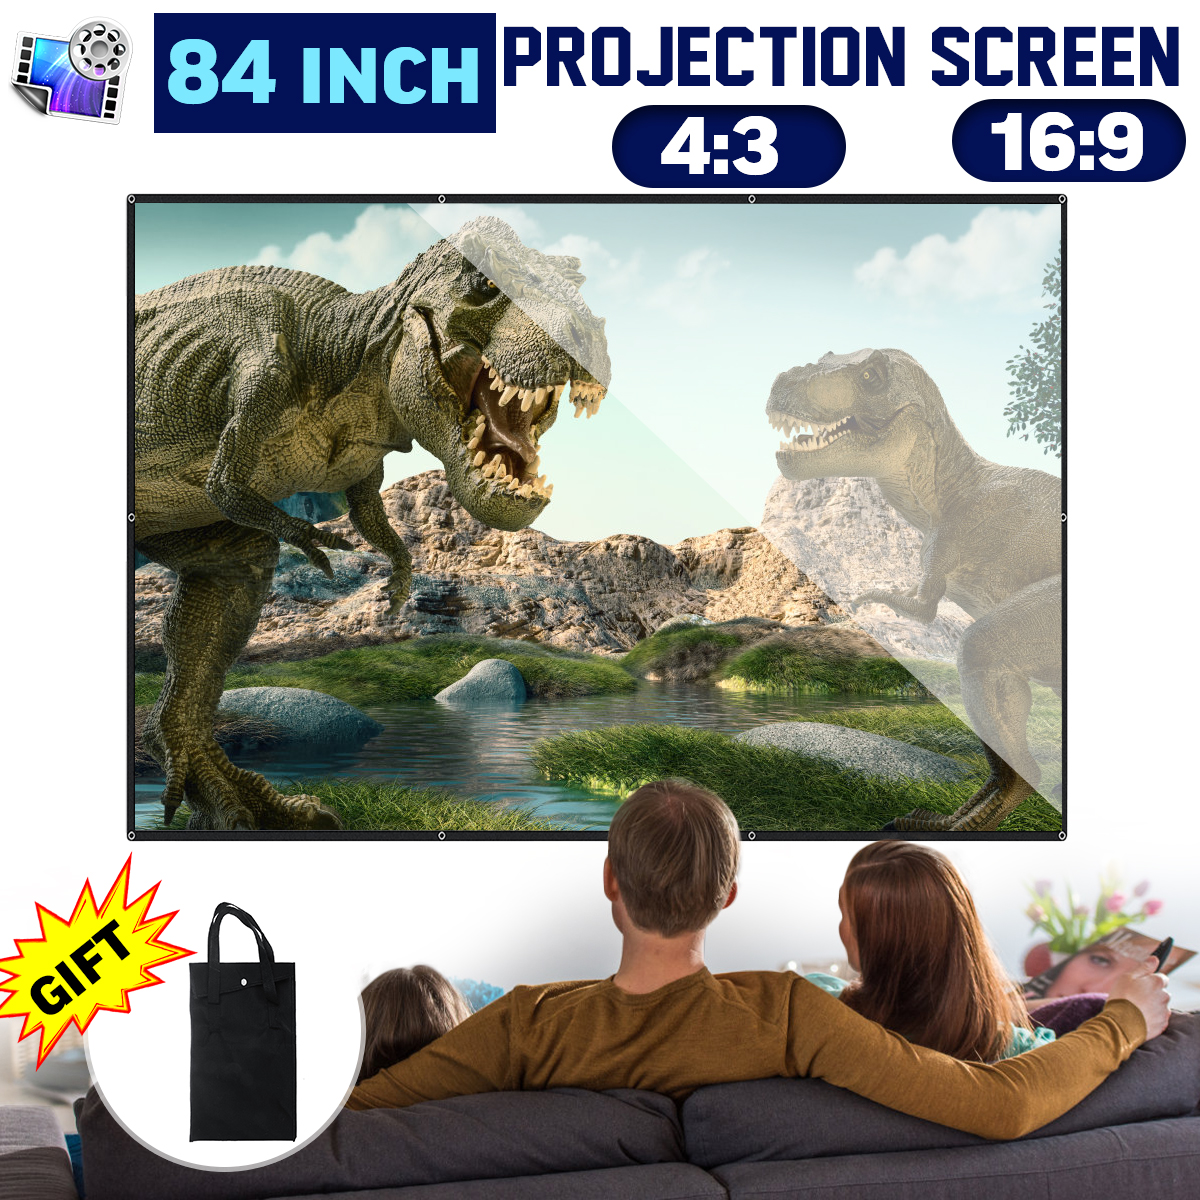 169-43-84-Inches-Portable-Projector-Curtain-Foldable-HD-Movie-Projector-Screen-Home-Theatre-Office-M-1671248-1